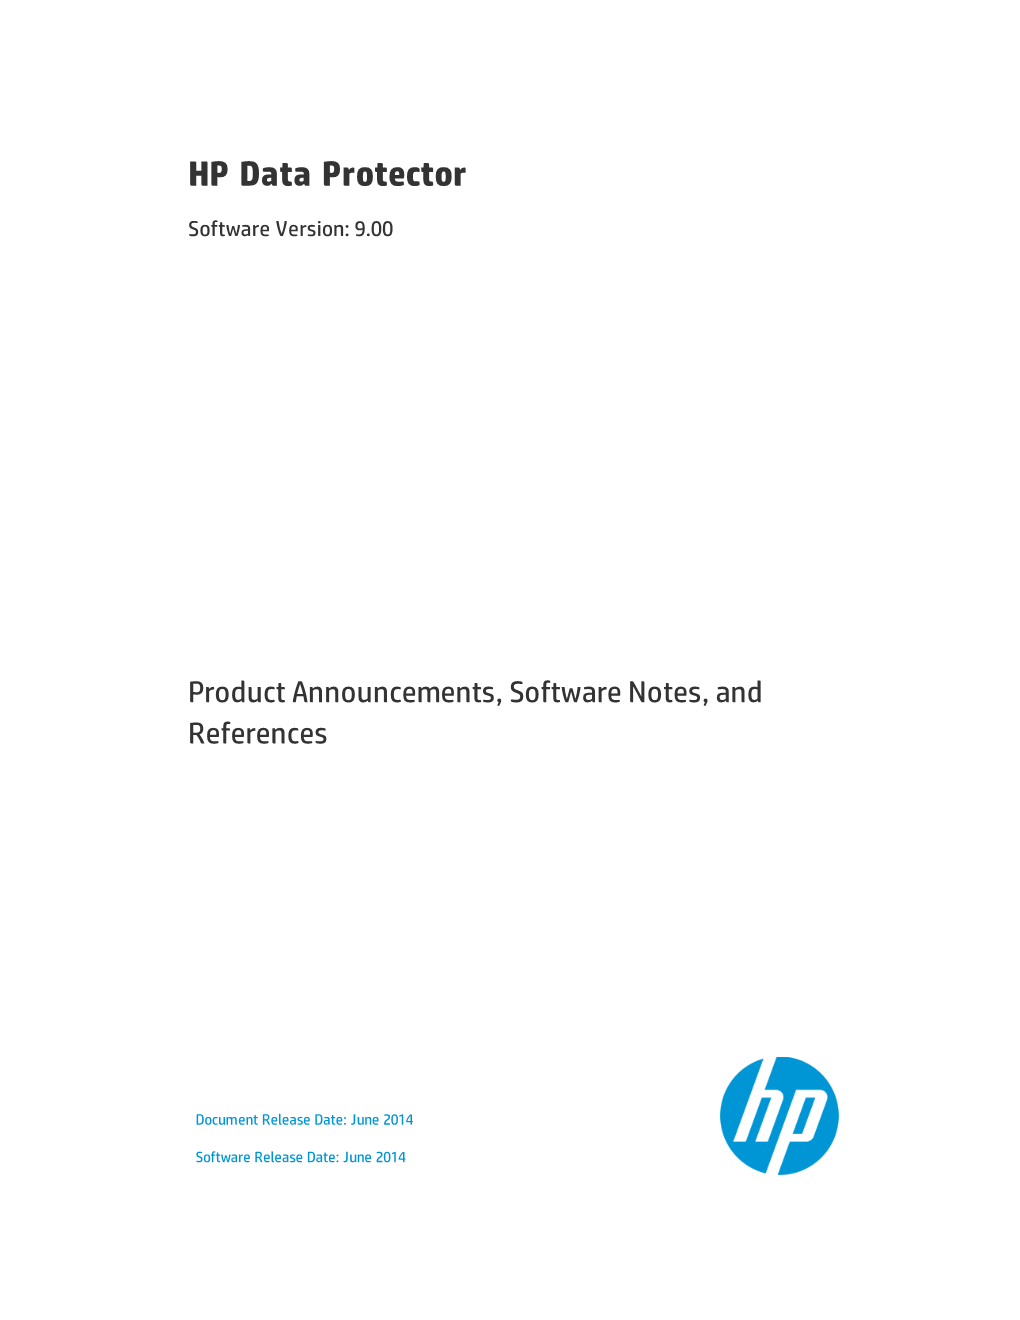 HP Data Protector 9.00 Product Announcements, Software Notes